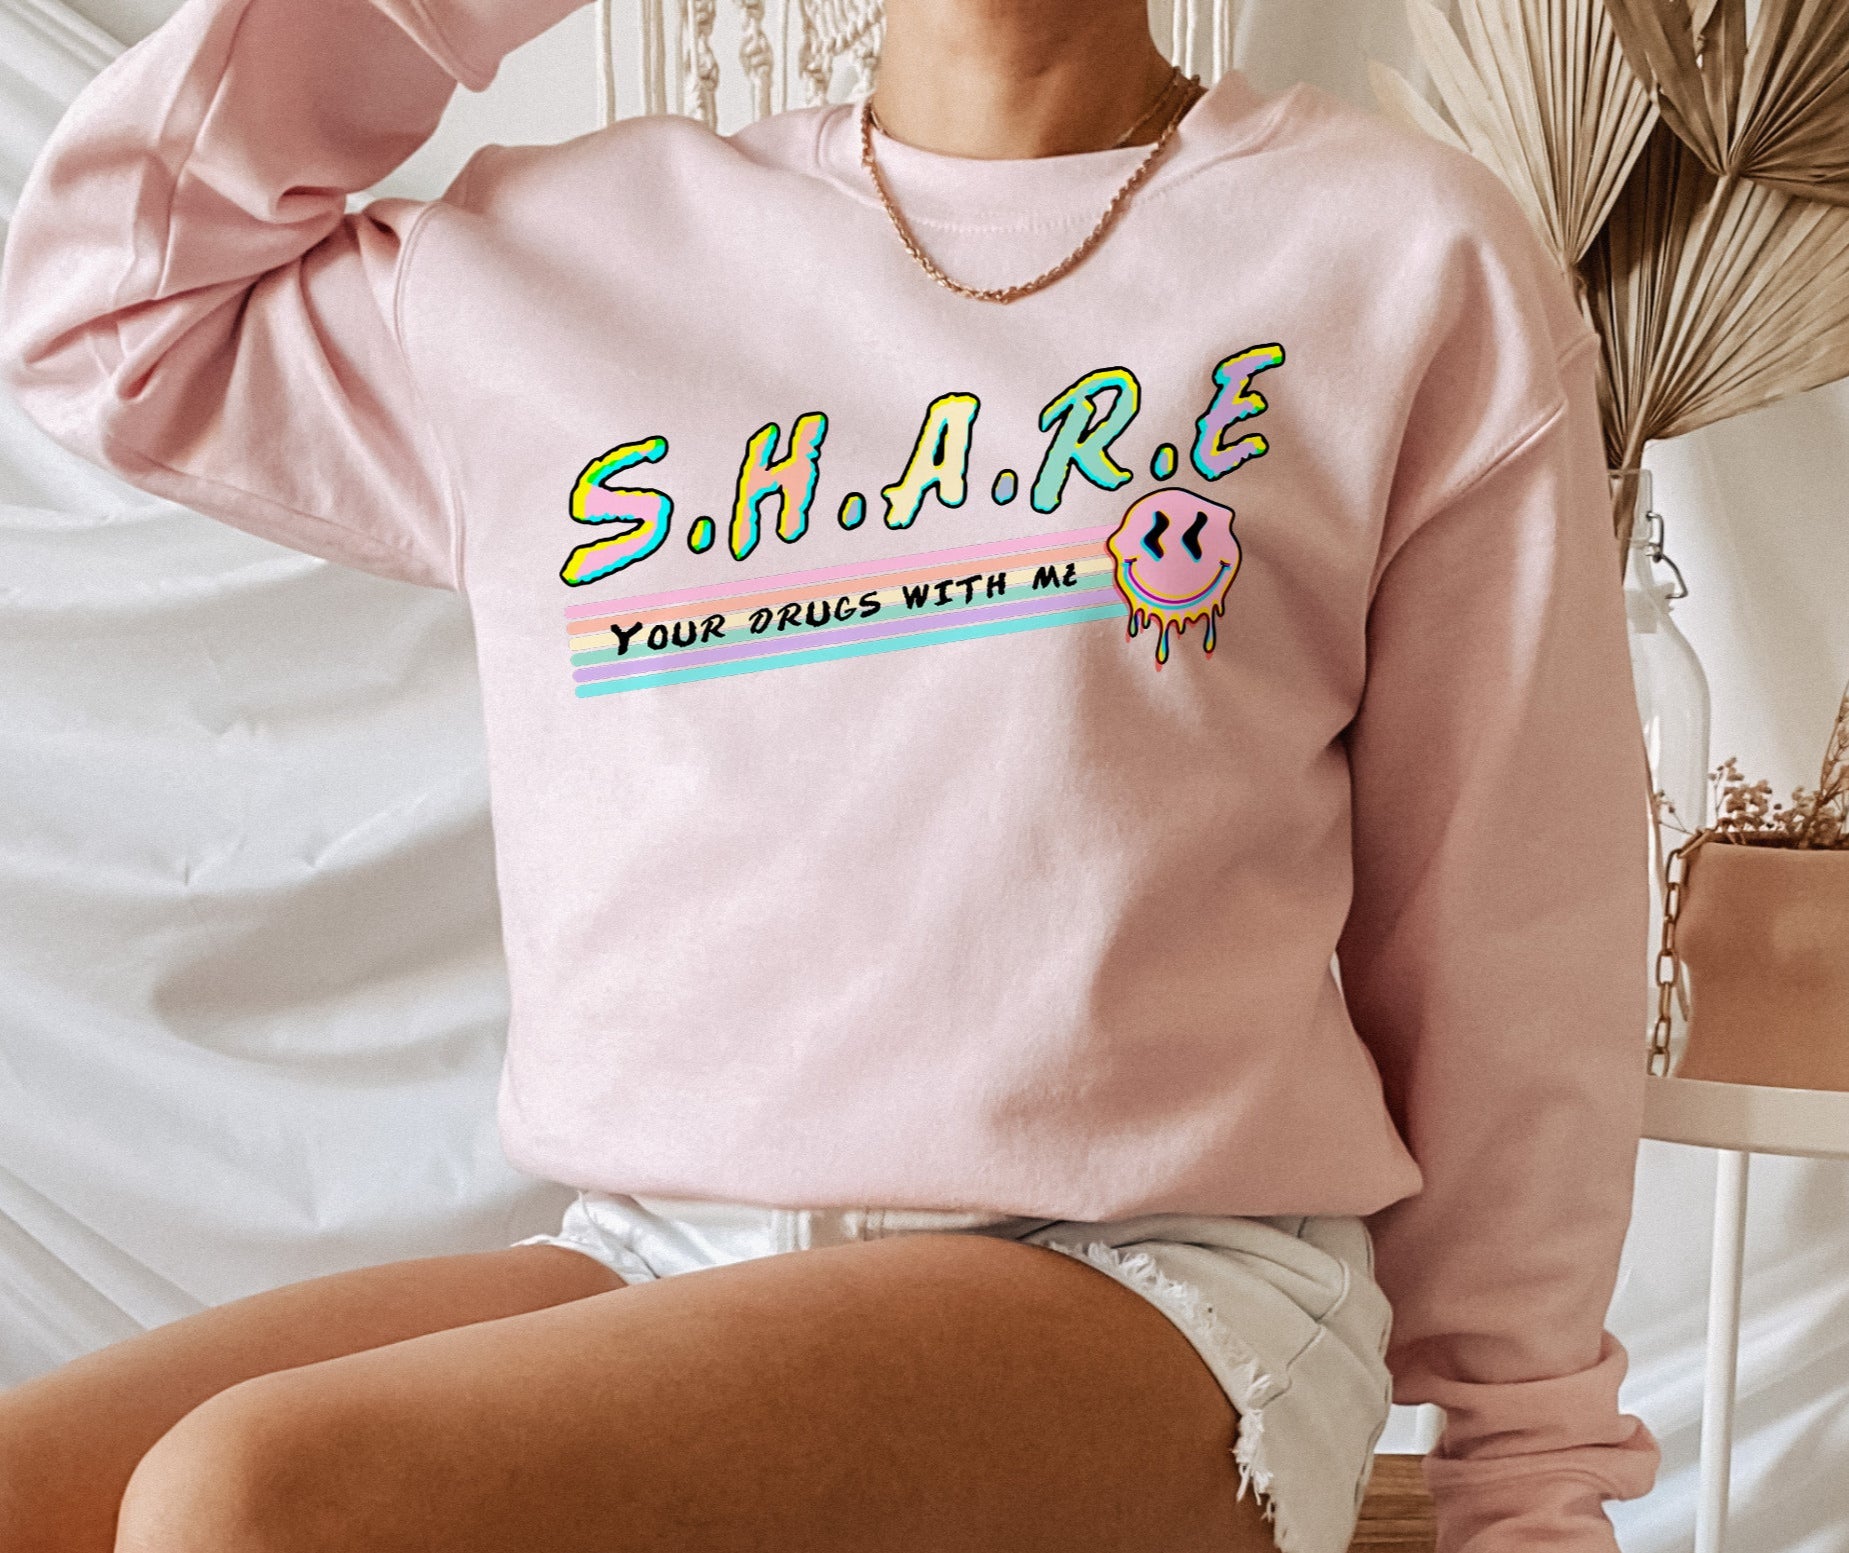 Share Your Drugs With Me Sweatshirt